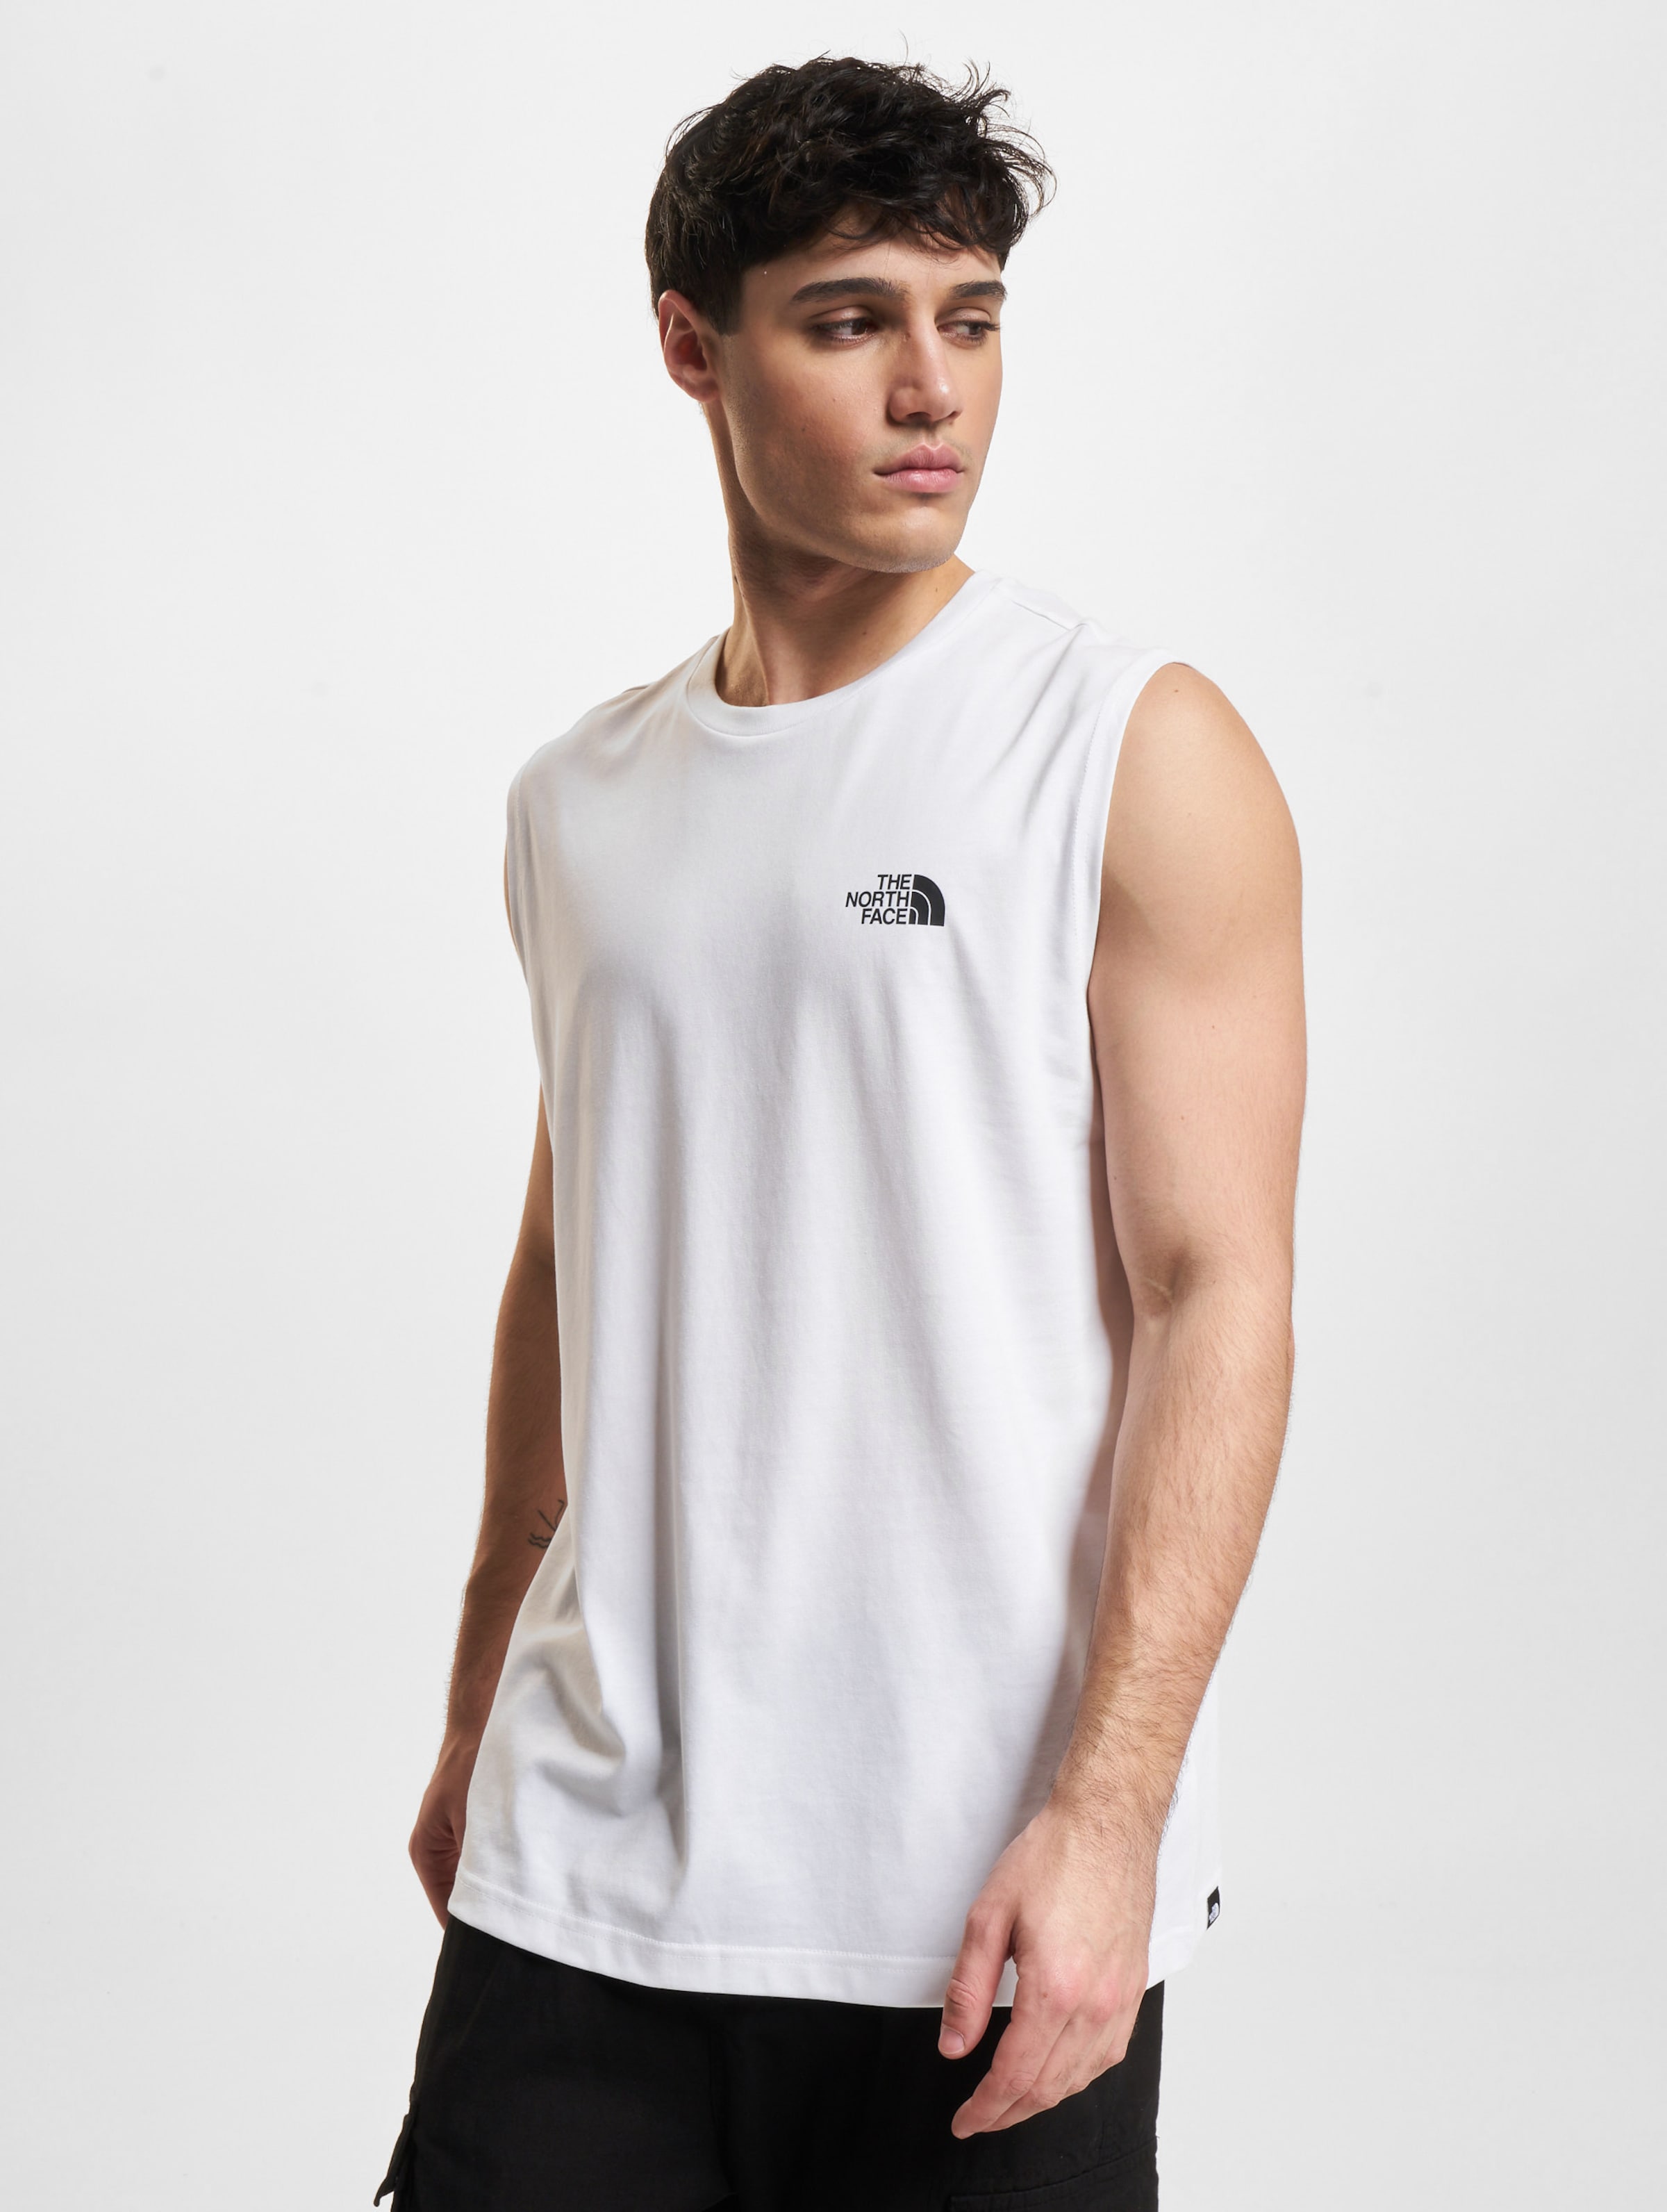 The North Face Simple Dome Tank Tops Mannen op kleur wit, Maat XXL